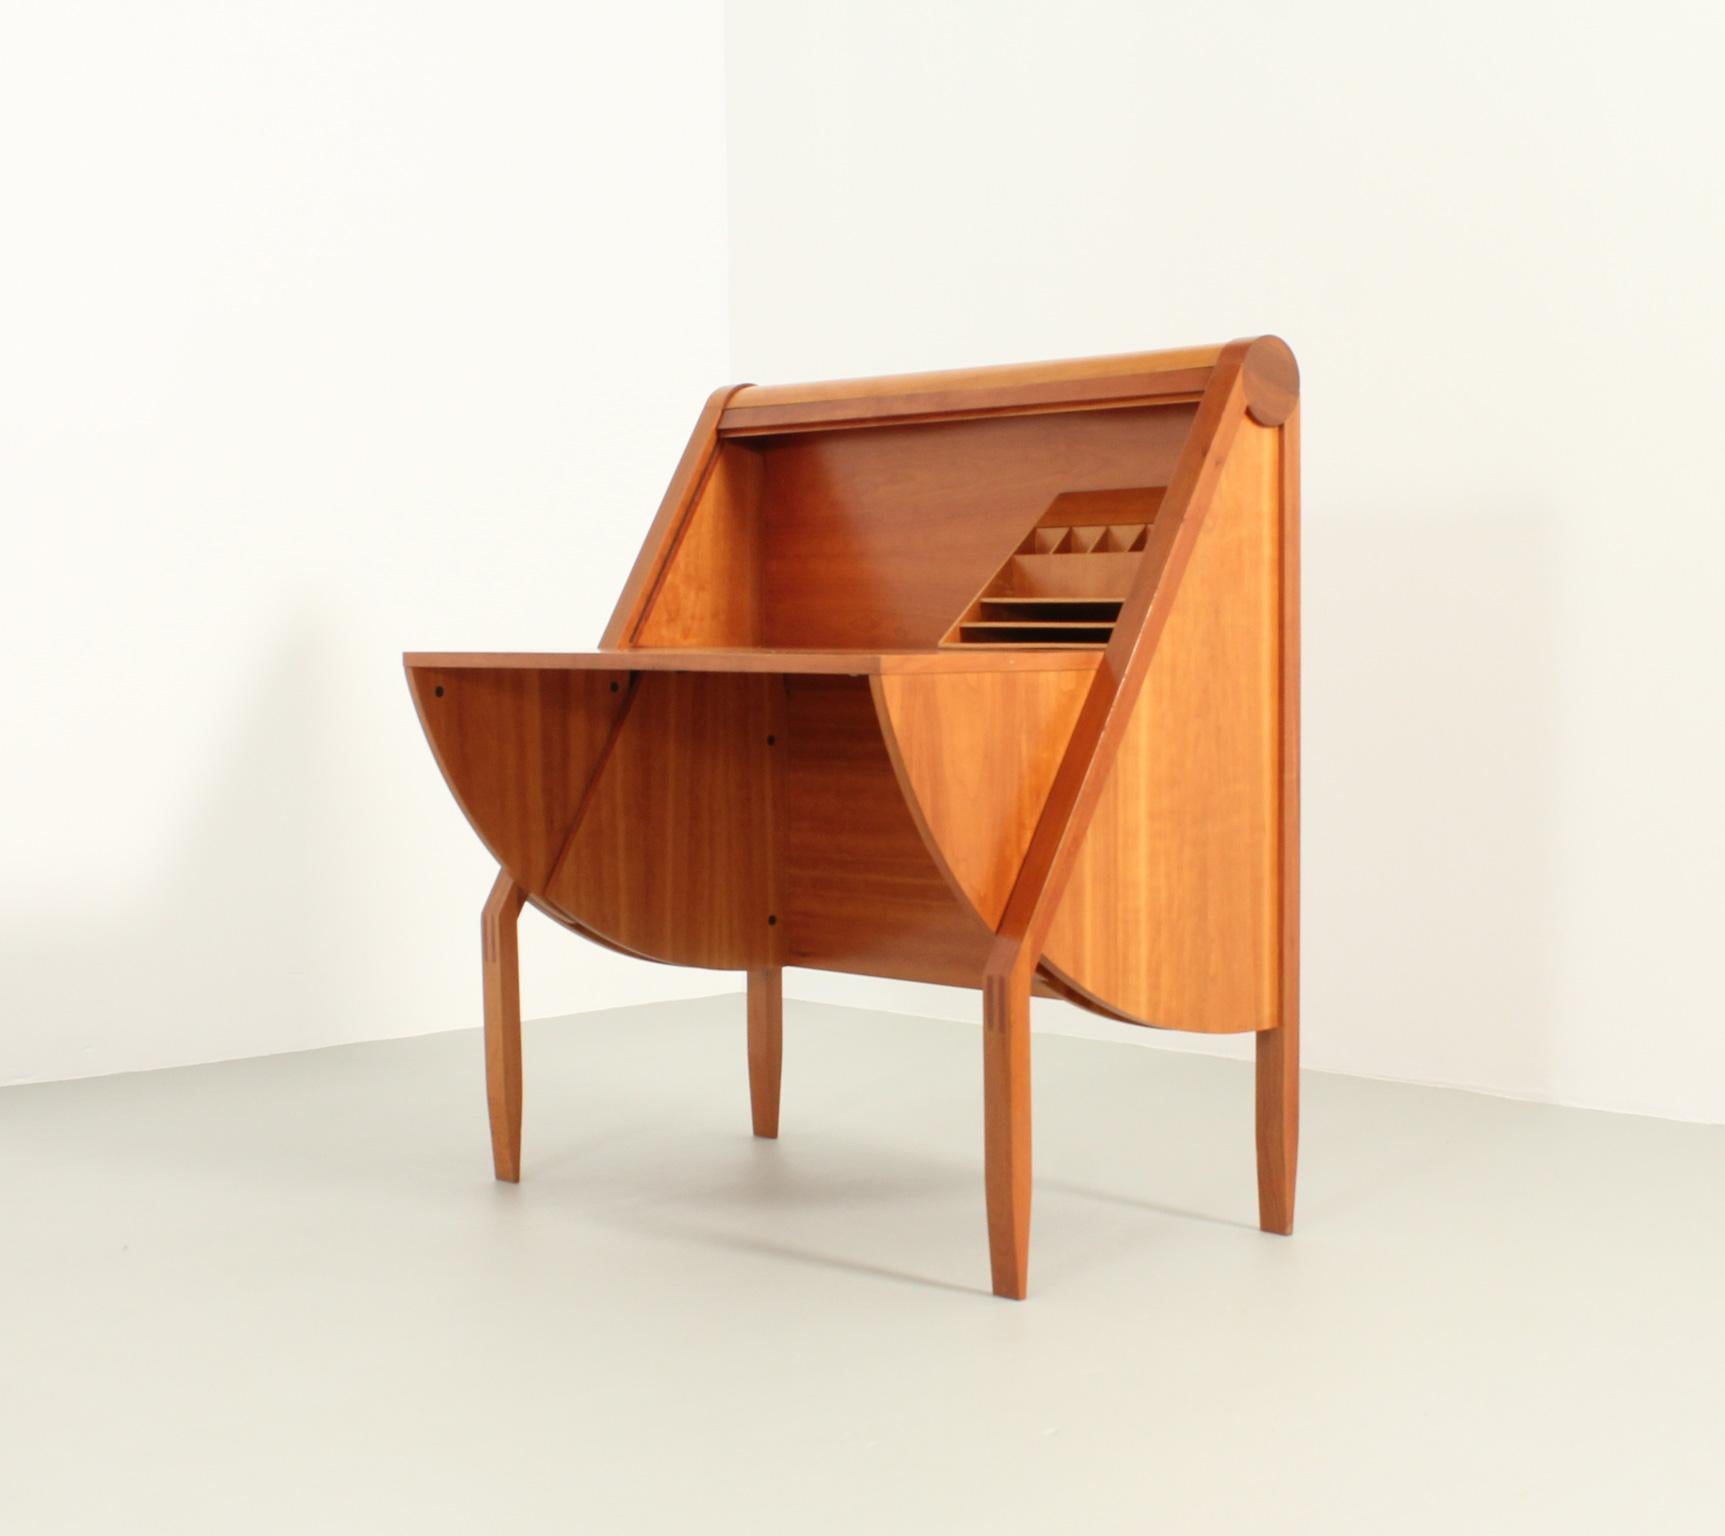 Compás desk designed in 1990 by Pedro Miralles for Punt Mobles, Spain. Iconic piece of postmodern design in Spain in cherry wood. Lifting work table with a rolltop with storage space and a small removable box with dividers.